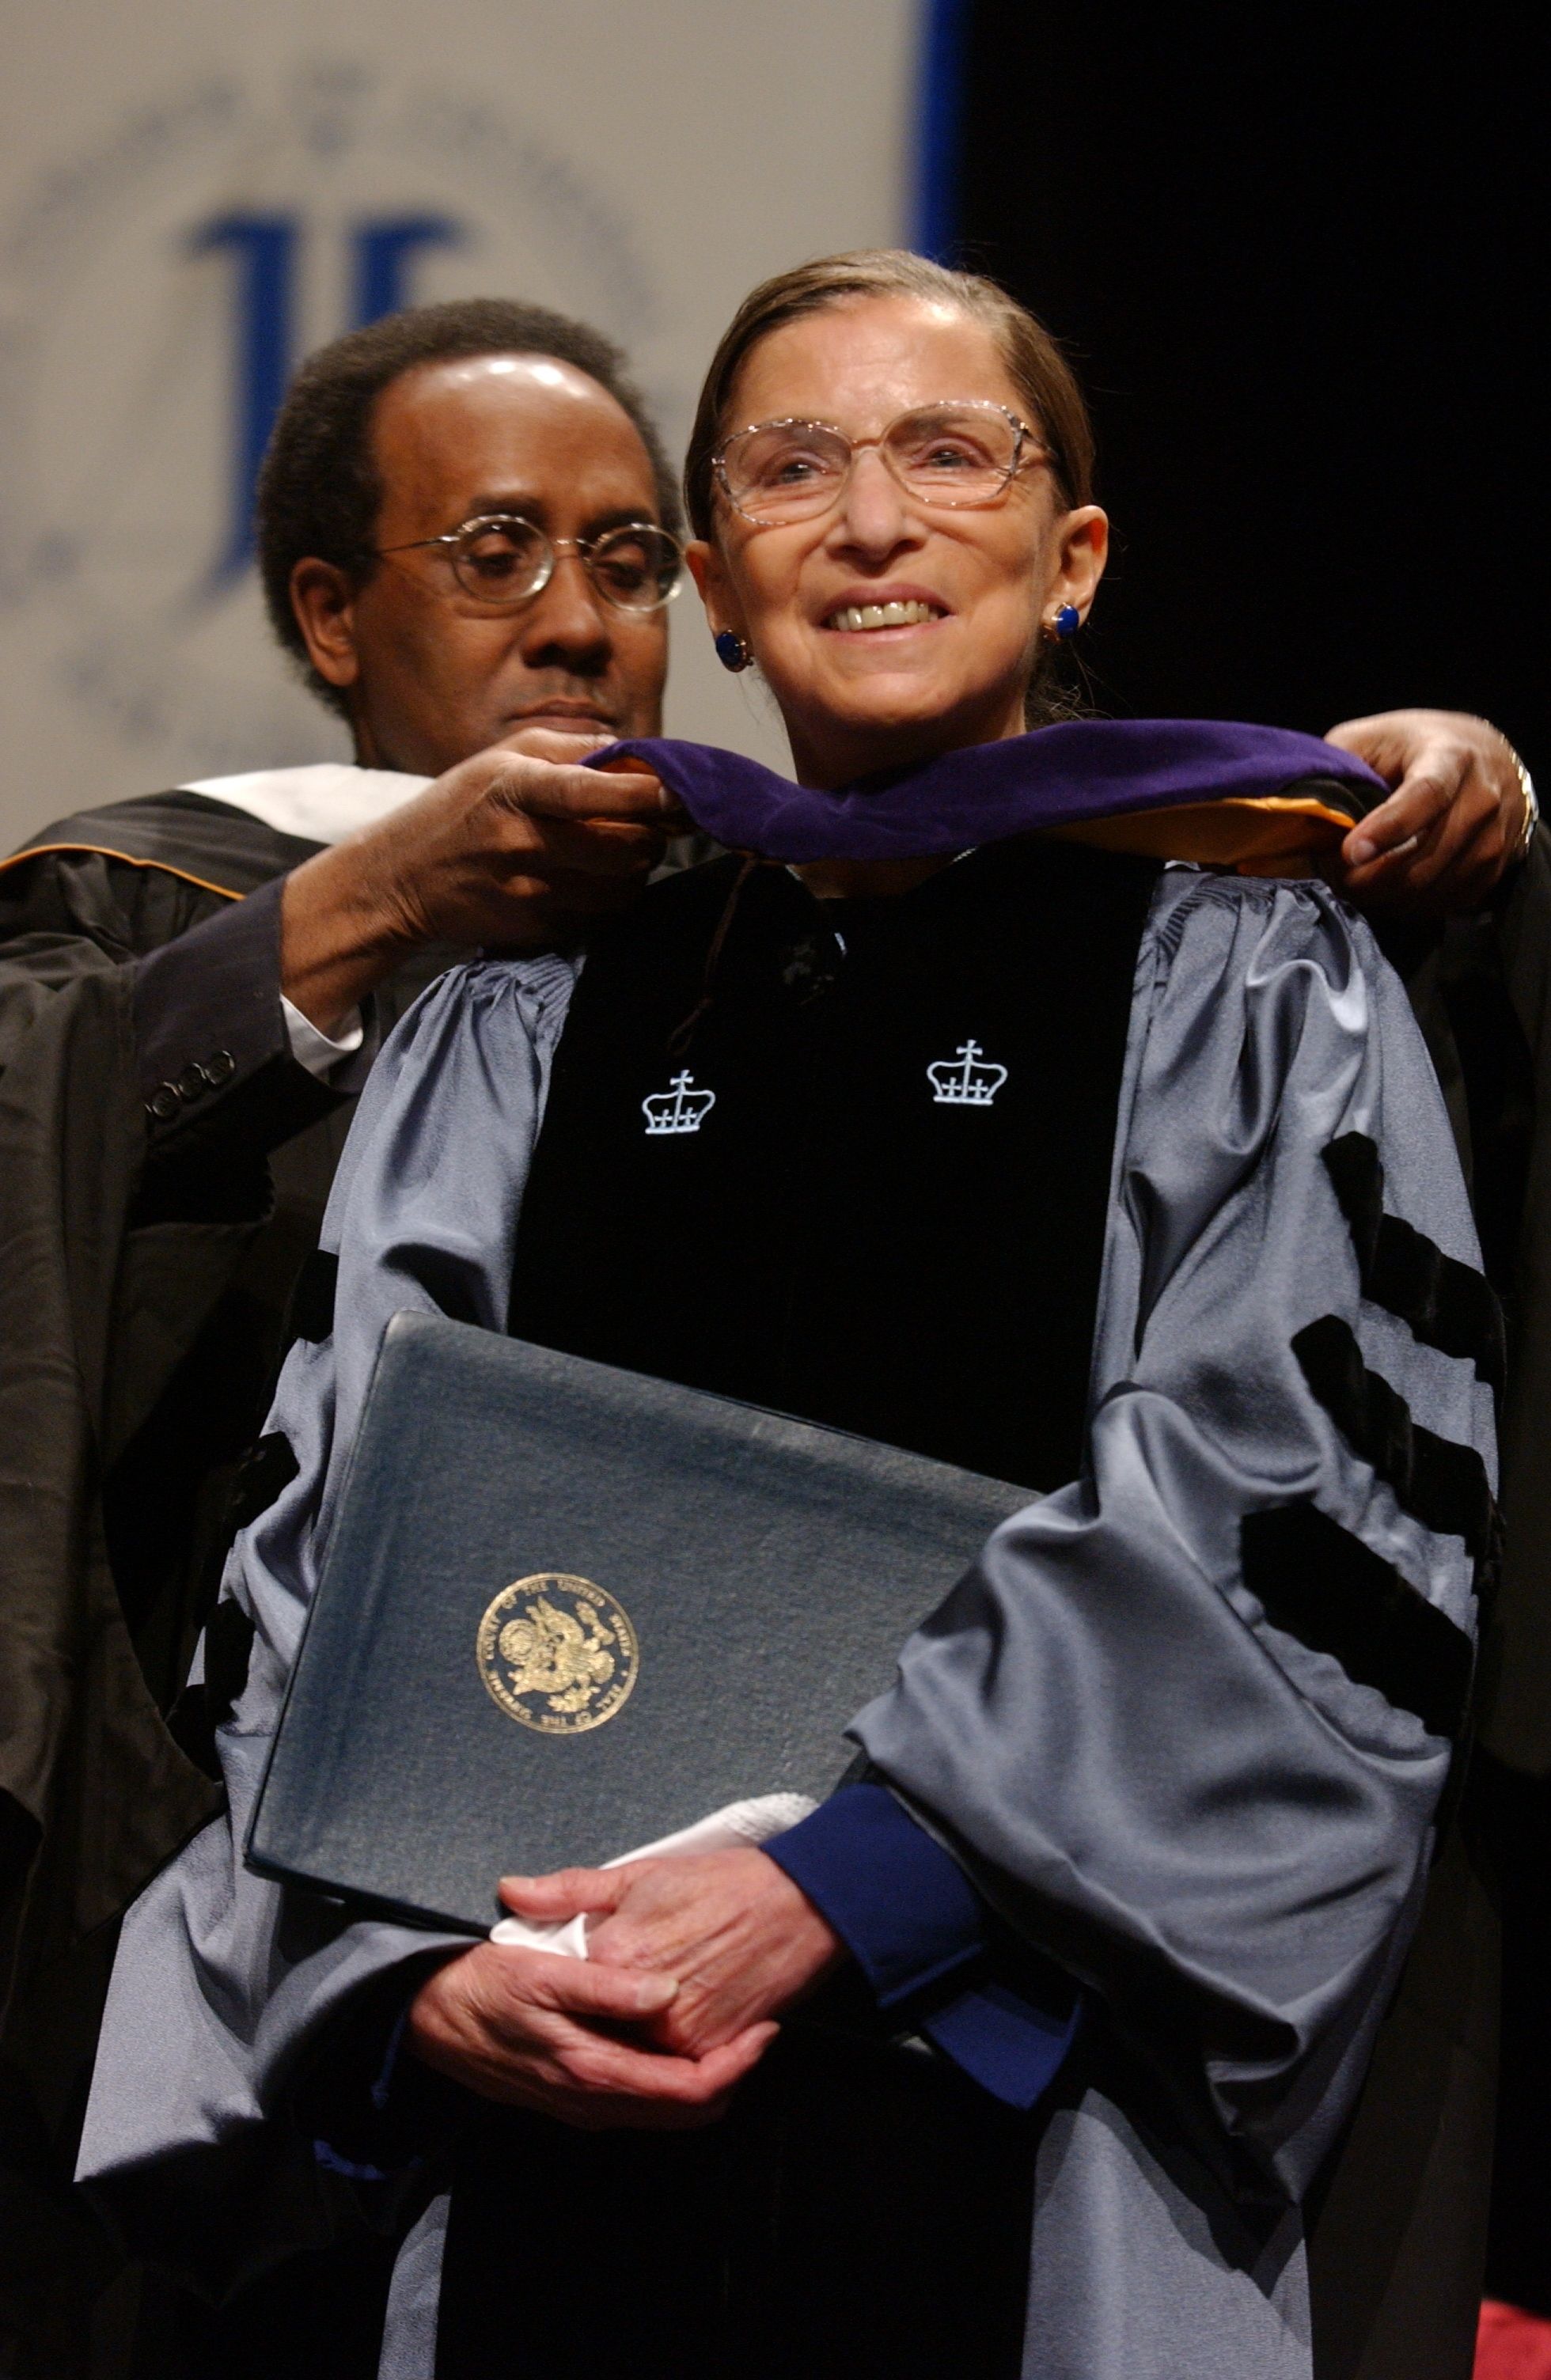 RBG receives an honorary degree from the John Jay College of Criminal Justice in 2004. Photo: Ramin Talaie/Corbis via Getty Images